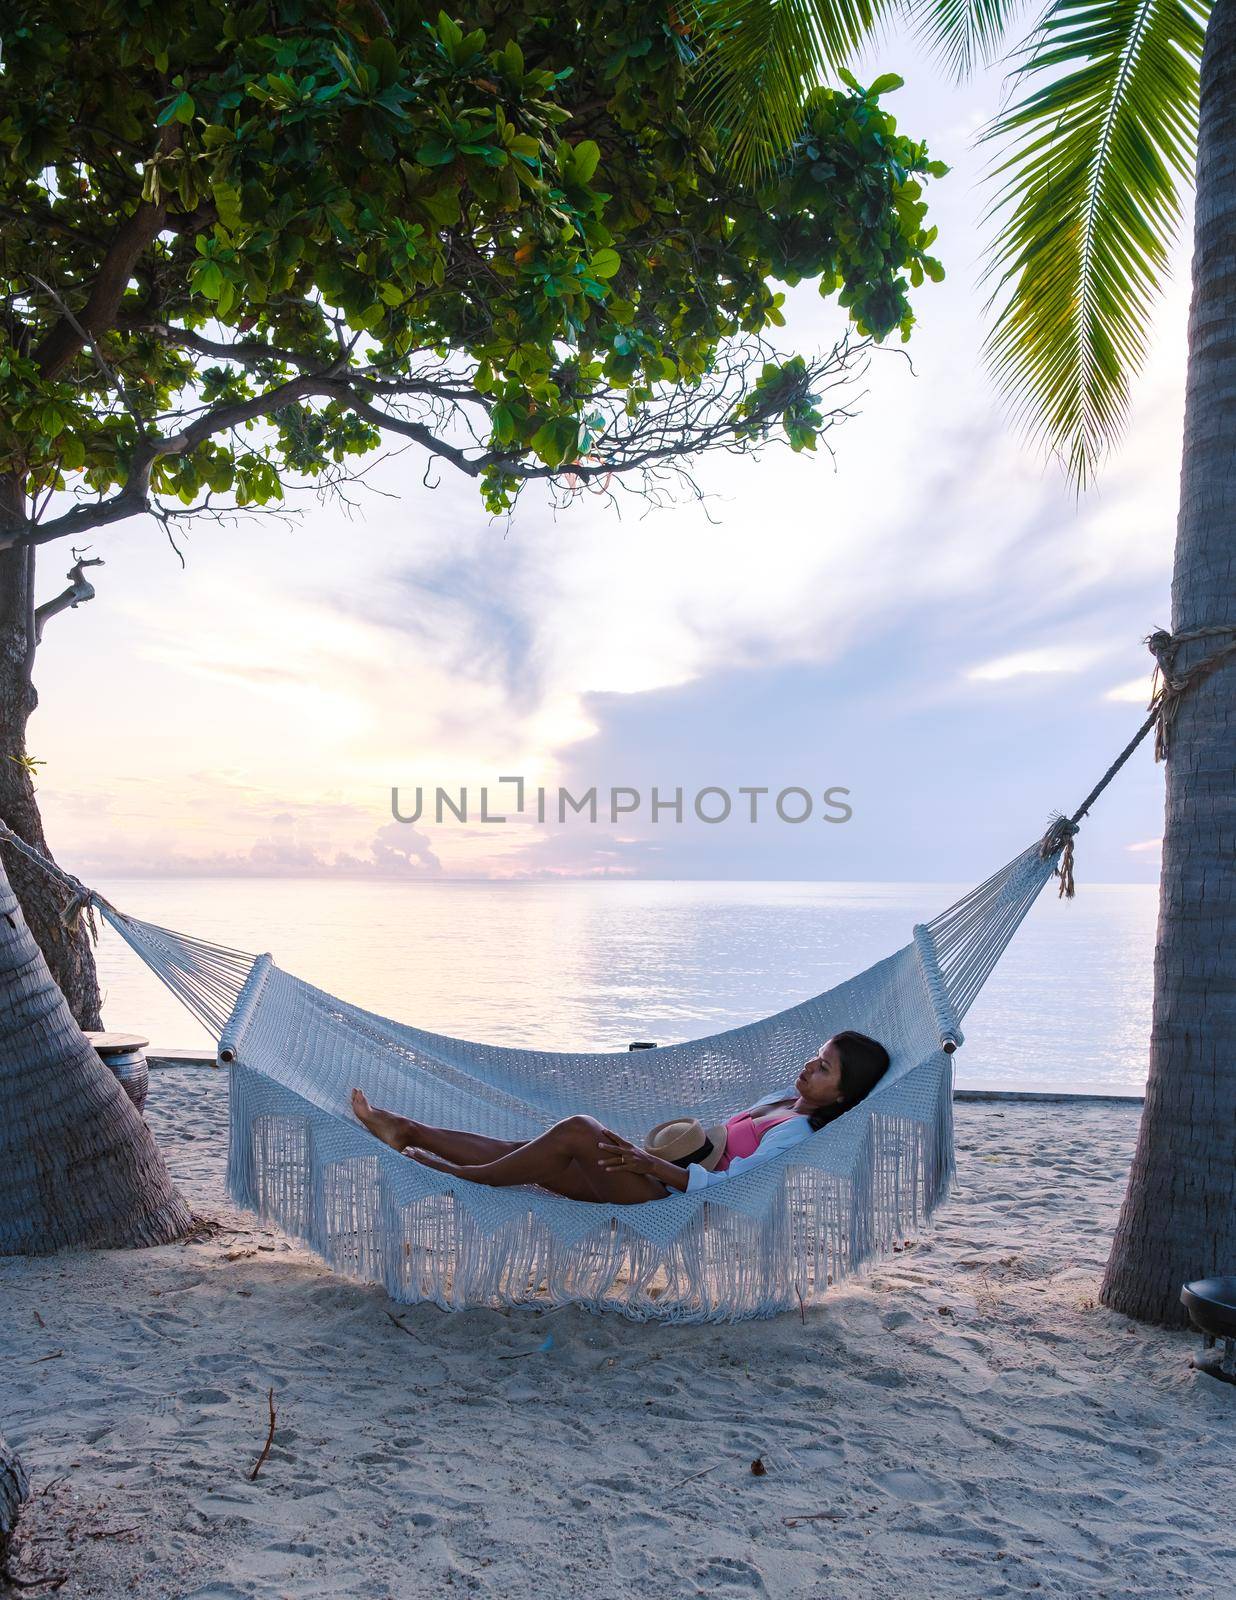 women watching sunrise in a White hammock under palm trees at a tropical beach in Thailand Hua Hin by fokkebok